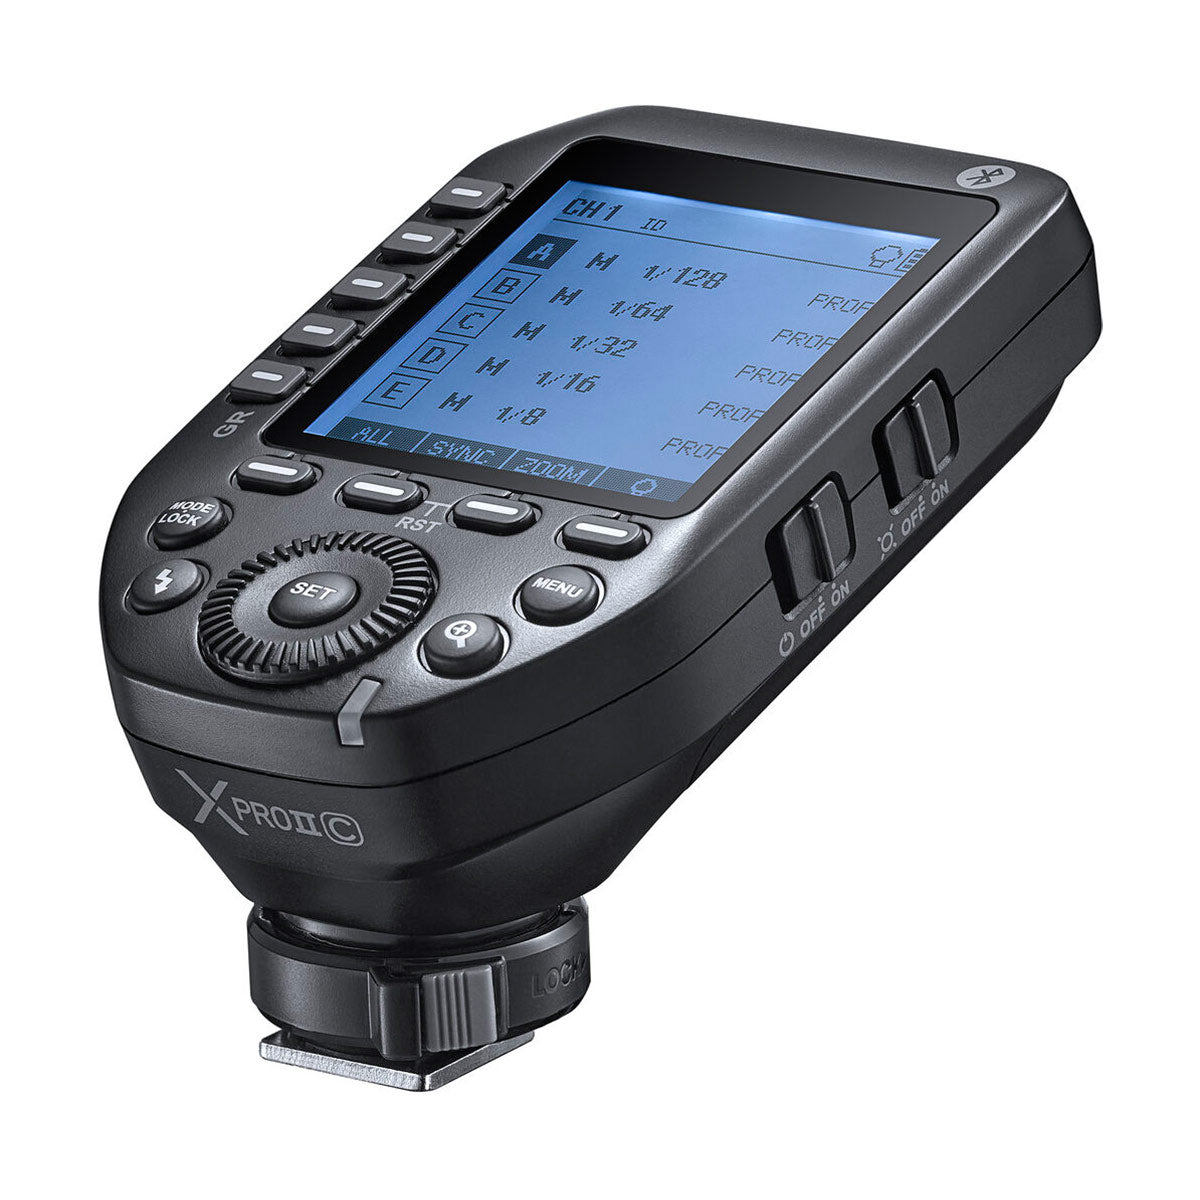 Godox XProIIC TTL Wireless Flash Transmitter for Canon